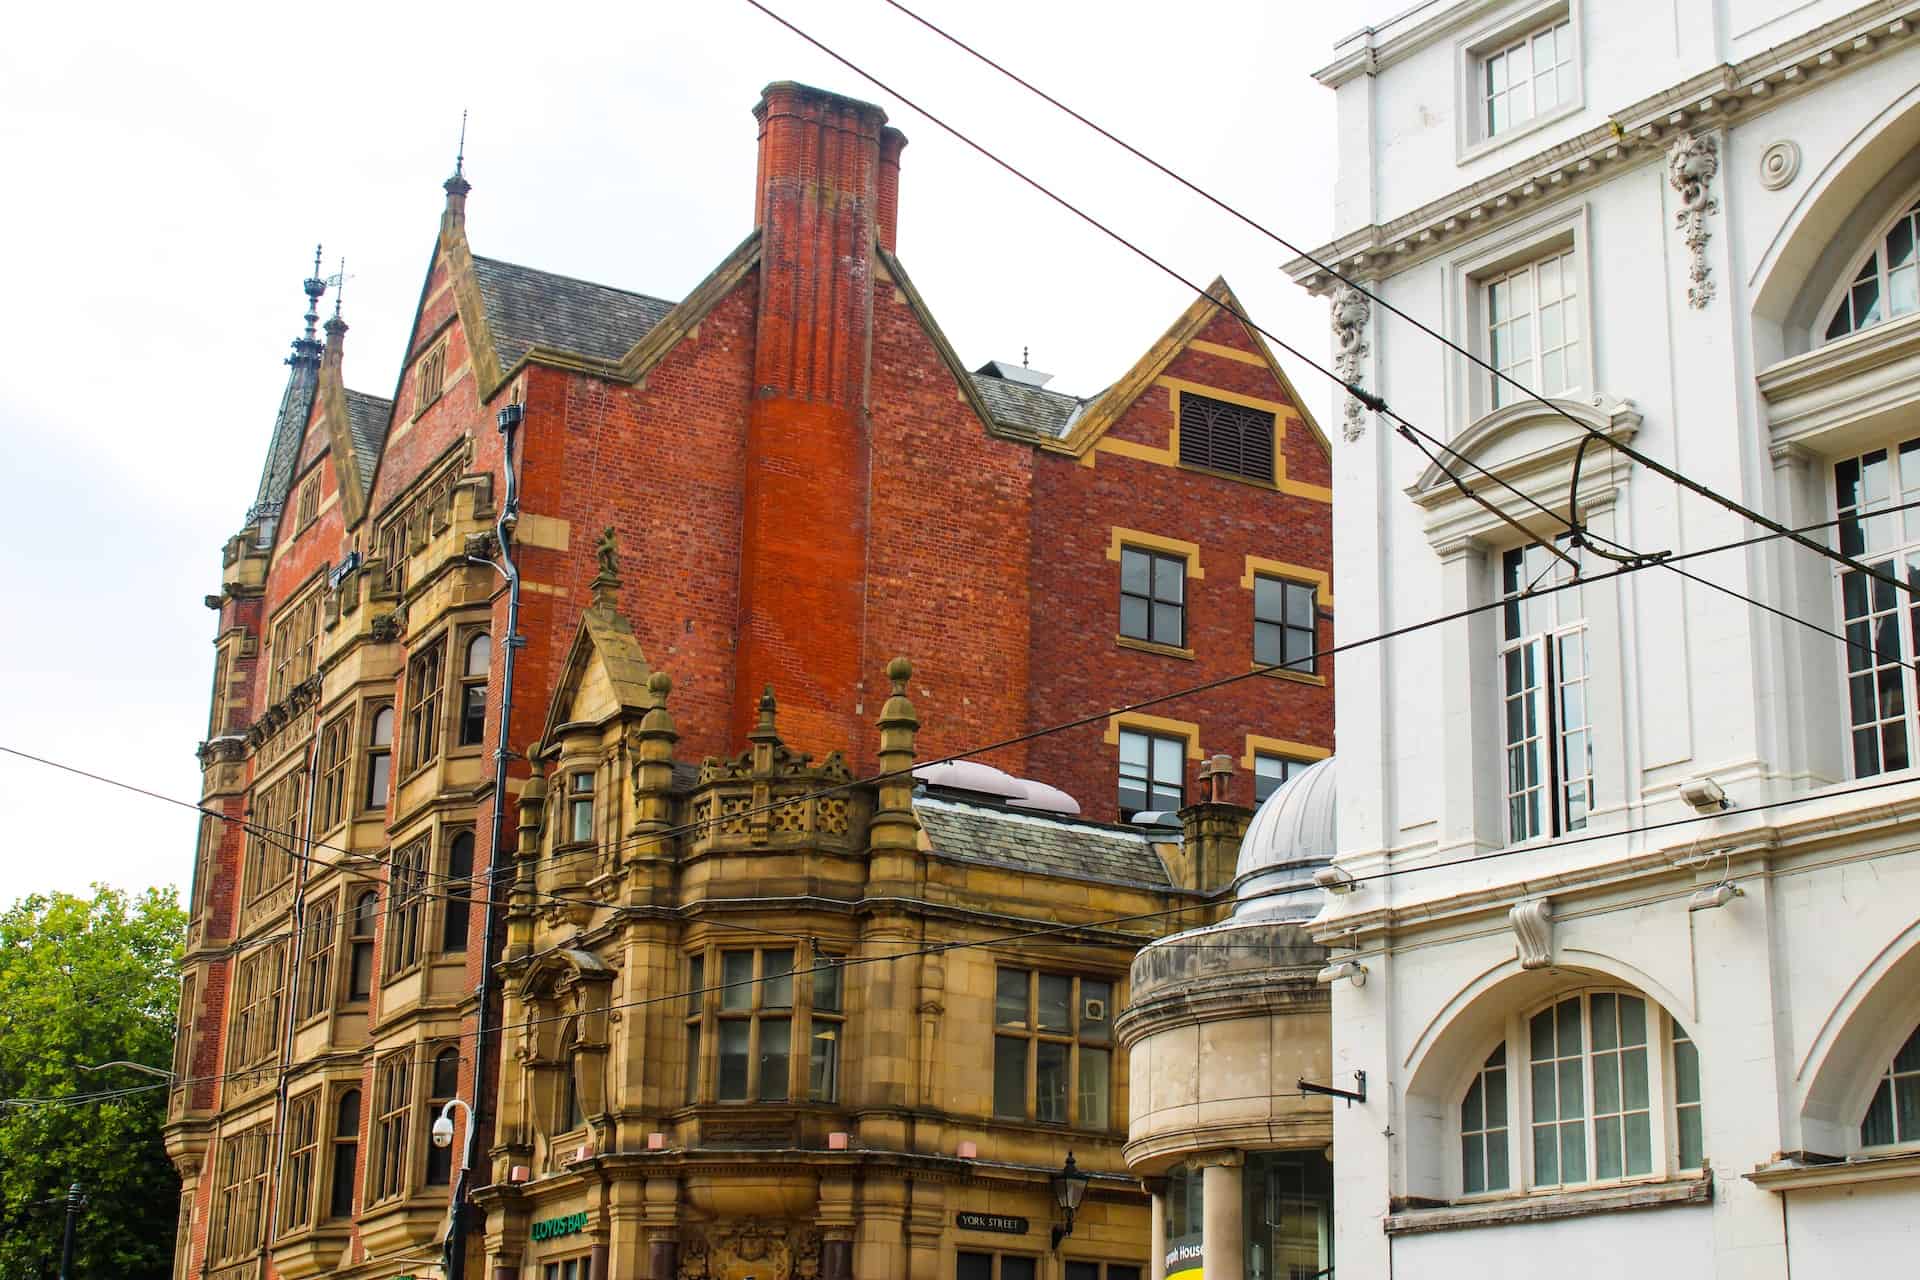 An example of a listed building in Sheffield